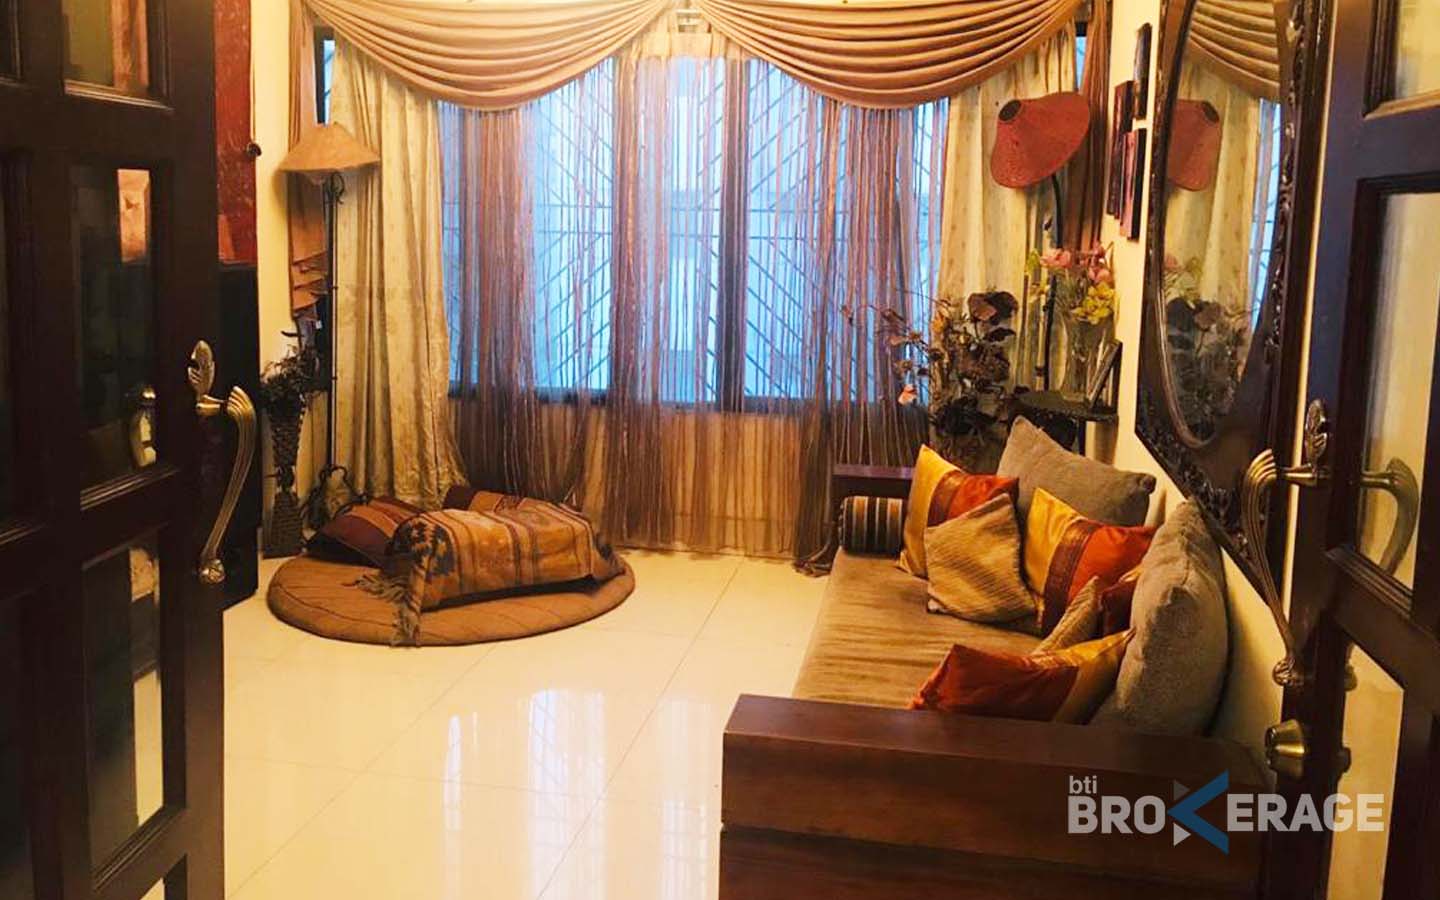 apartment for sale in dhaka